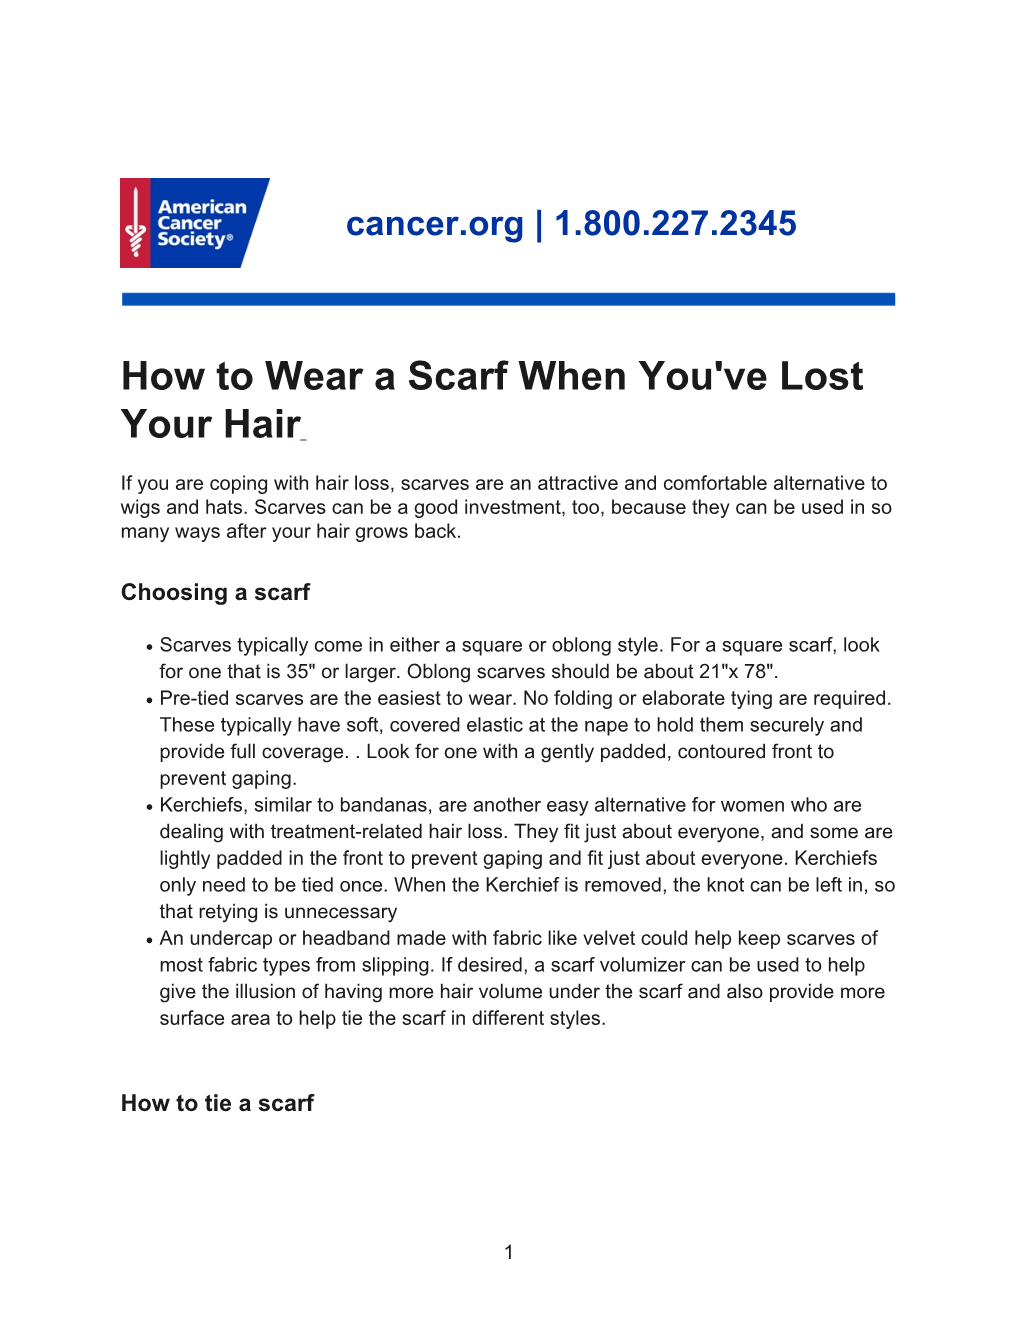 Cancer.Org | 1.800.227.2345 How to Wear a Scarf When You've Lost